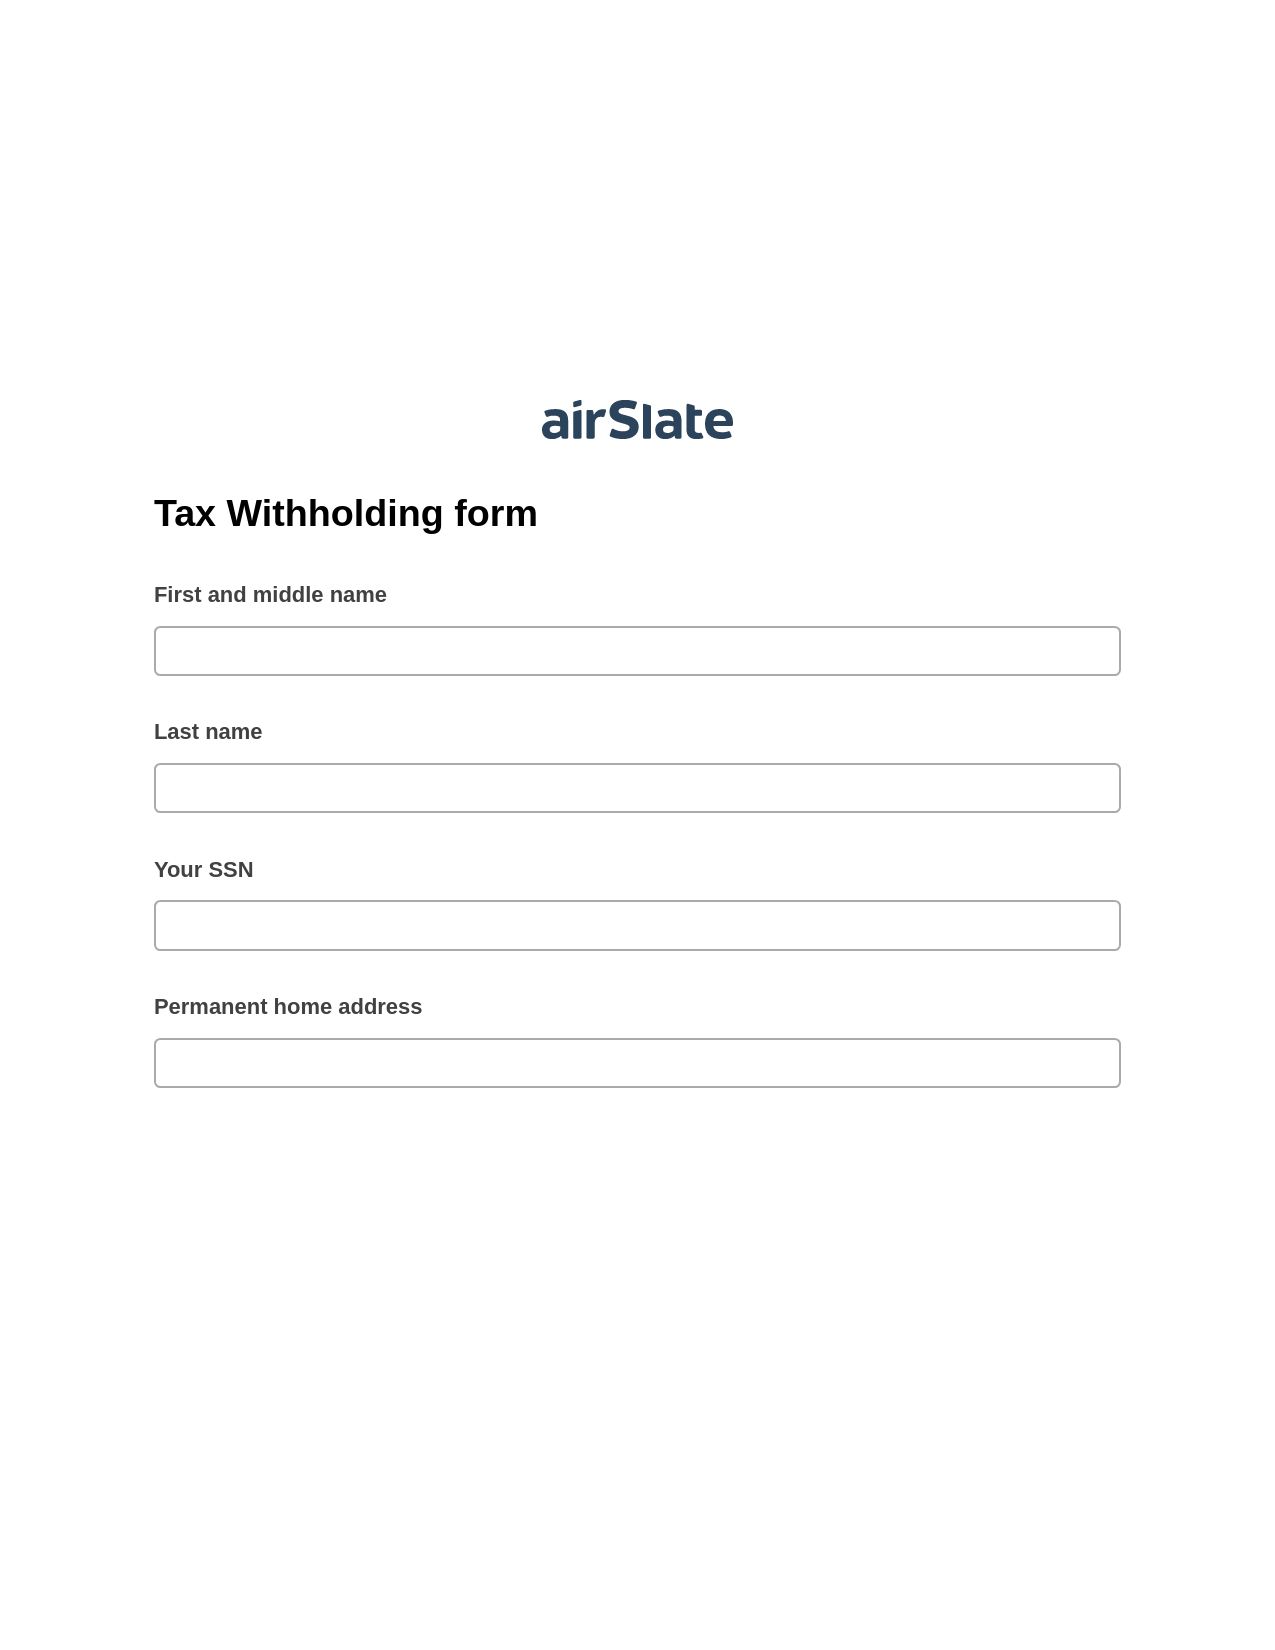 Multirole Tax Withholding form Pre-fill from Excel Spreadsheet Bot, Google Calendar Bot, Box Bot